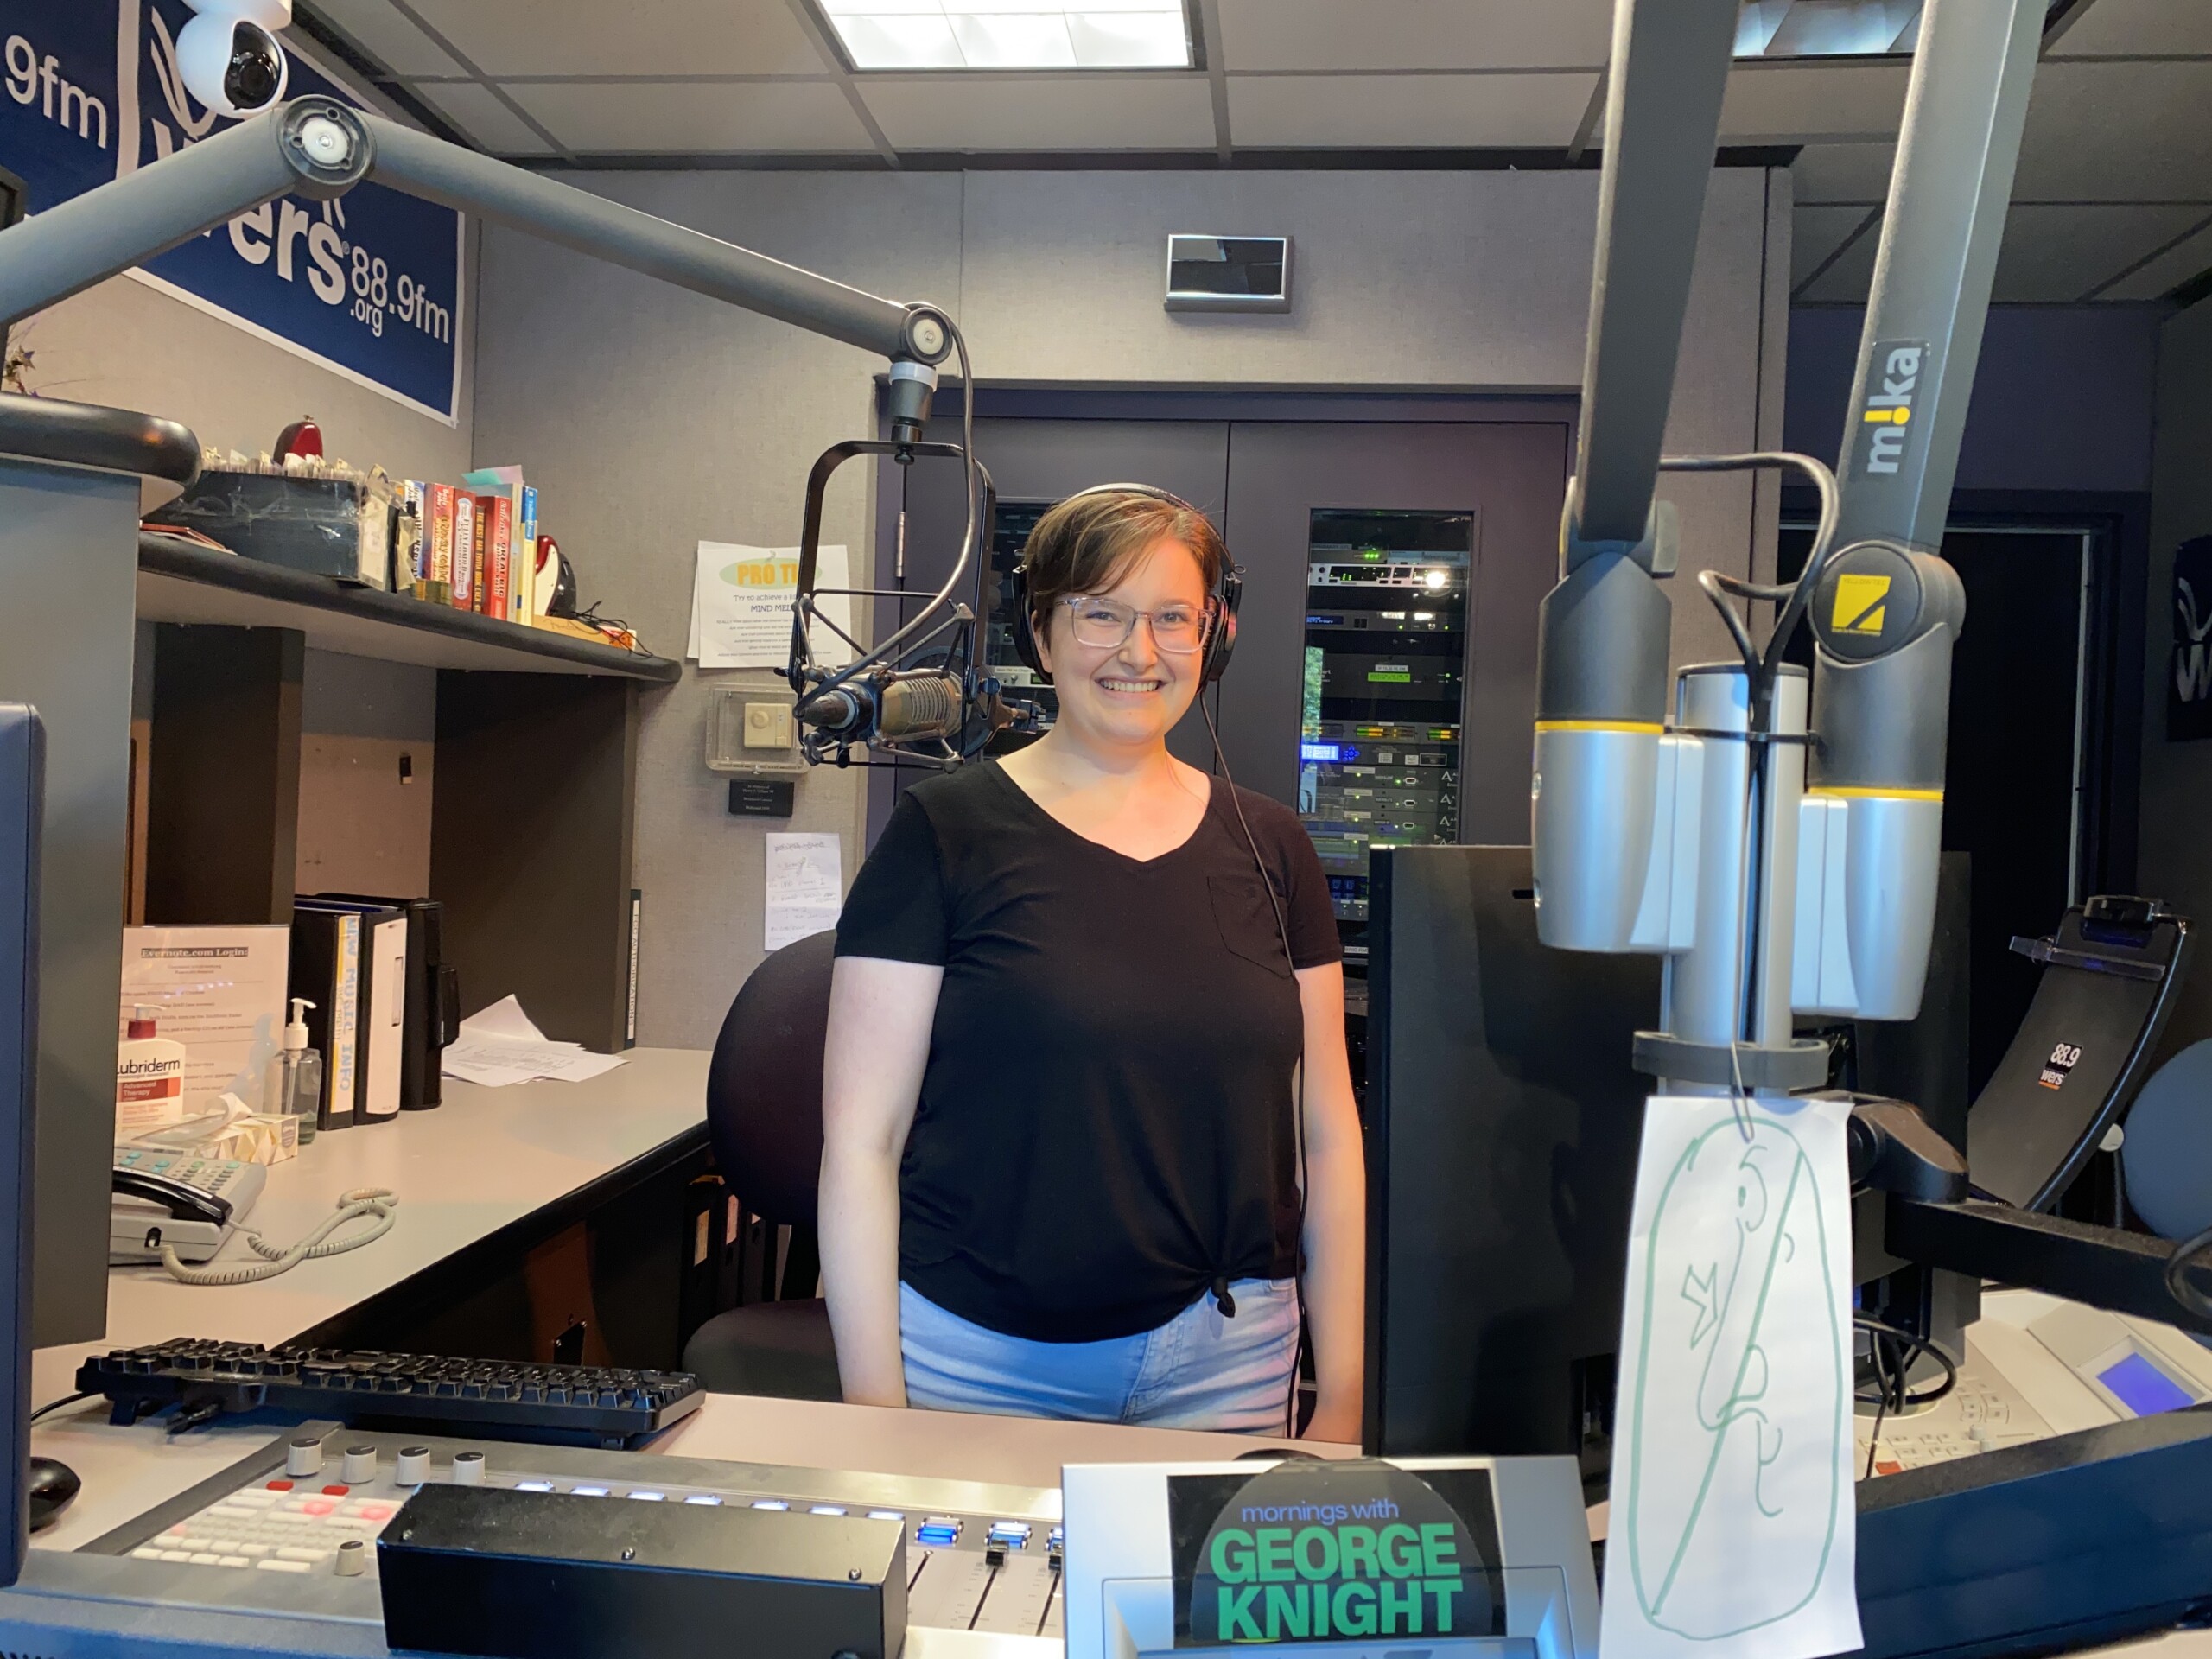 Picture of Eva smiling in the air studio. She is a white woman with short brown hair. She is wearing a black T-shirt and jeans.